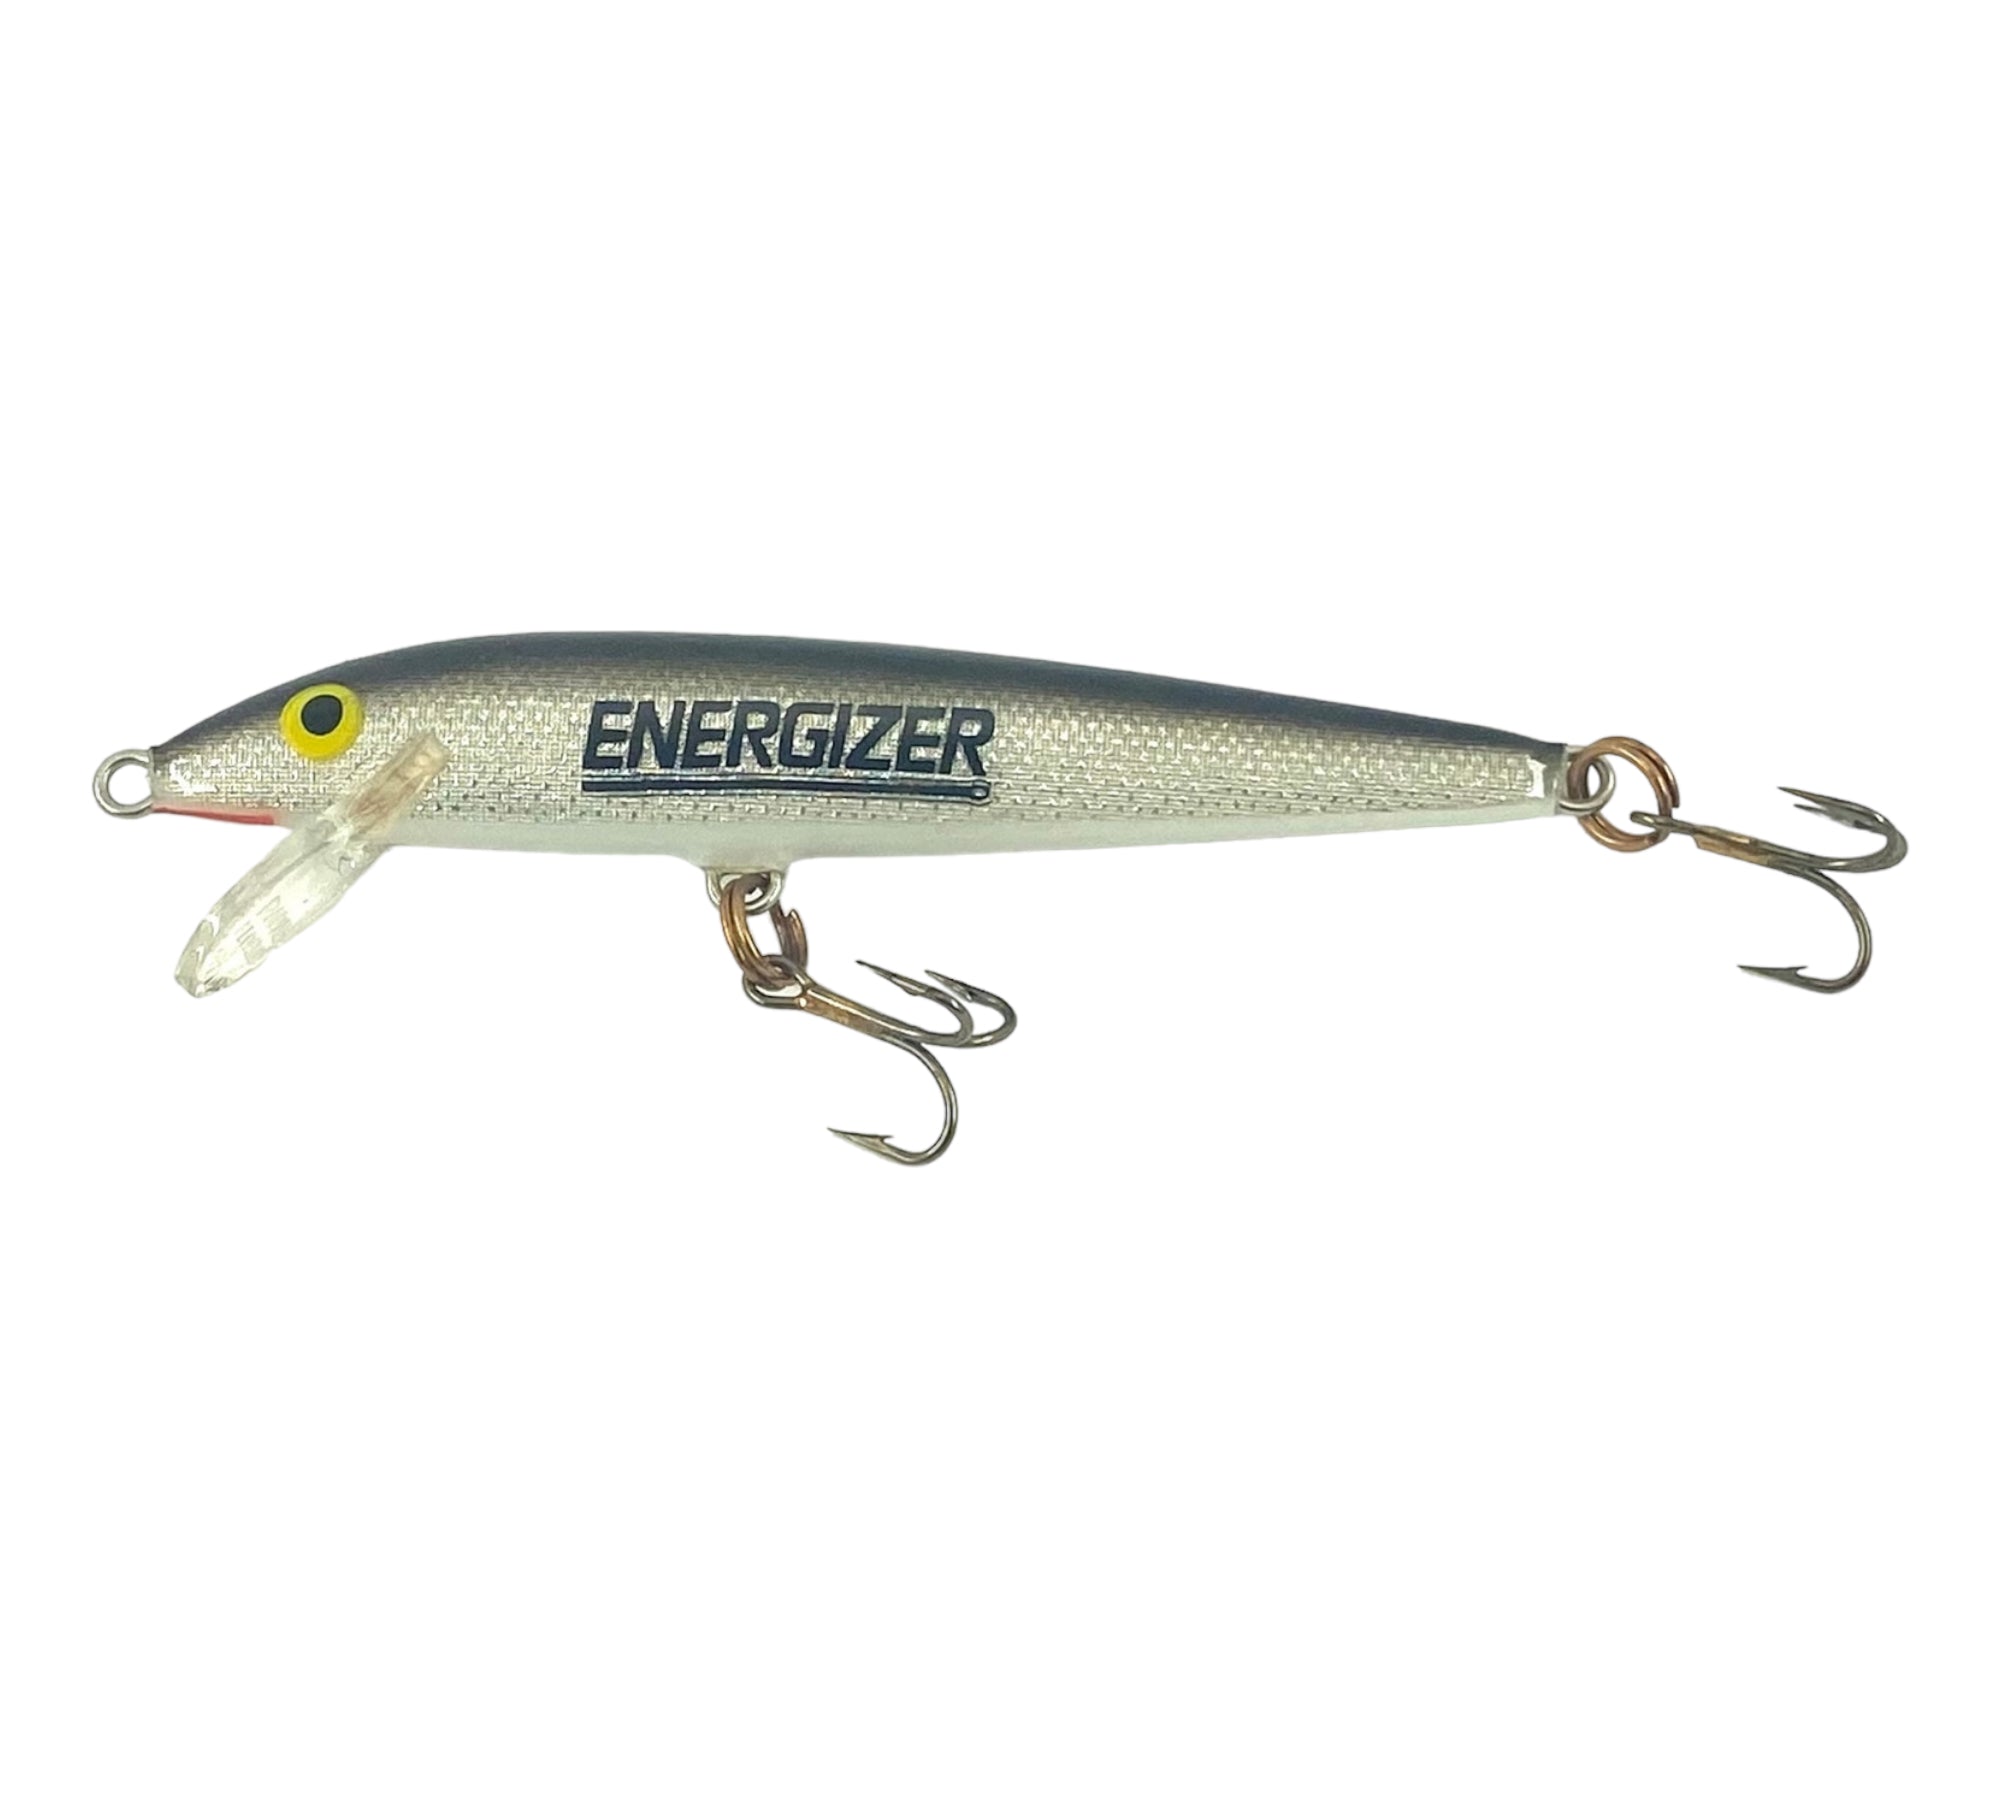 ENERGIZER BATTERY • RAPALA Fishing Lure • ADVERTISING BAIT – Toad Tackle